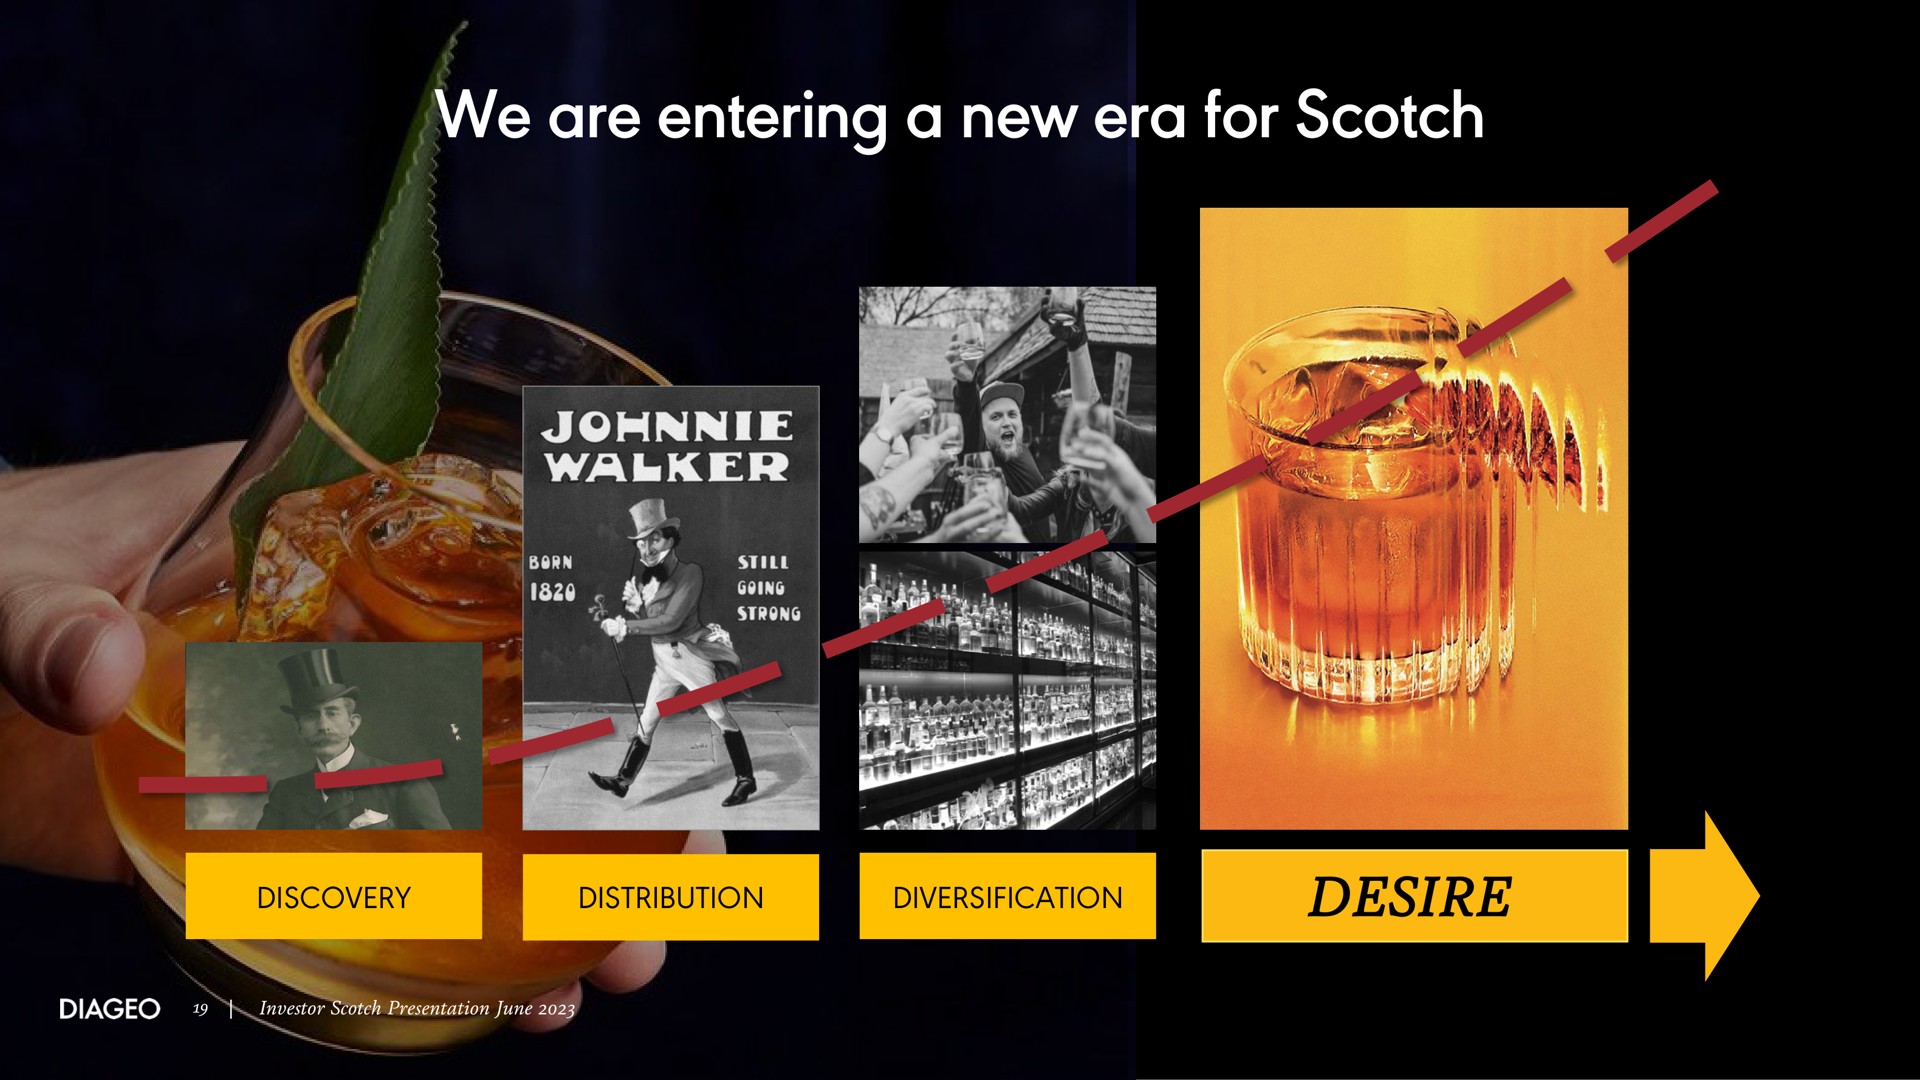 we are entering a new era for scotch desire an walker at men anes vet an cay presentation june | Diageo